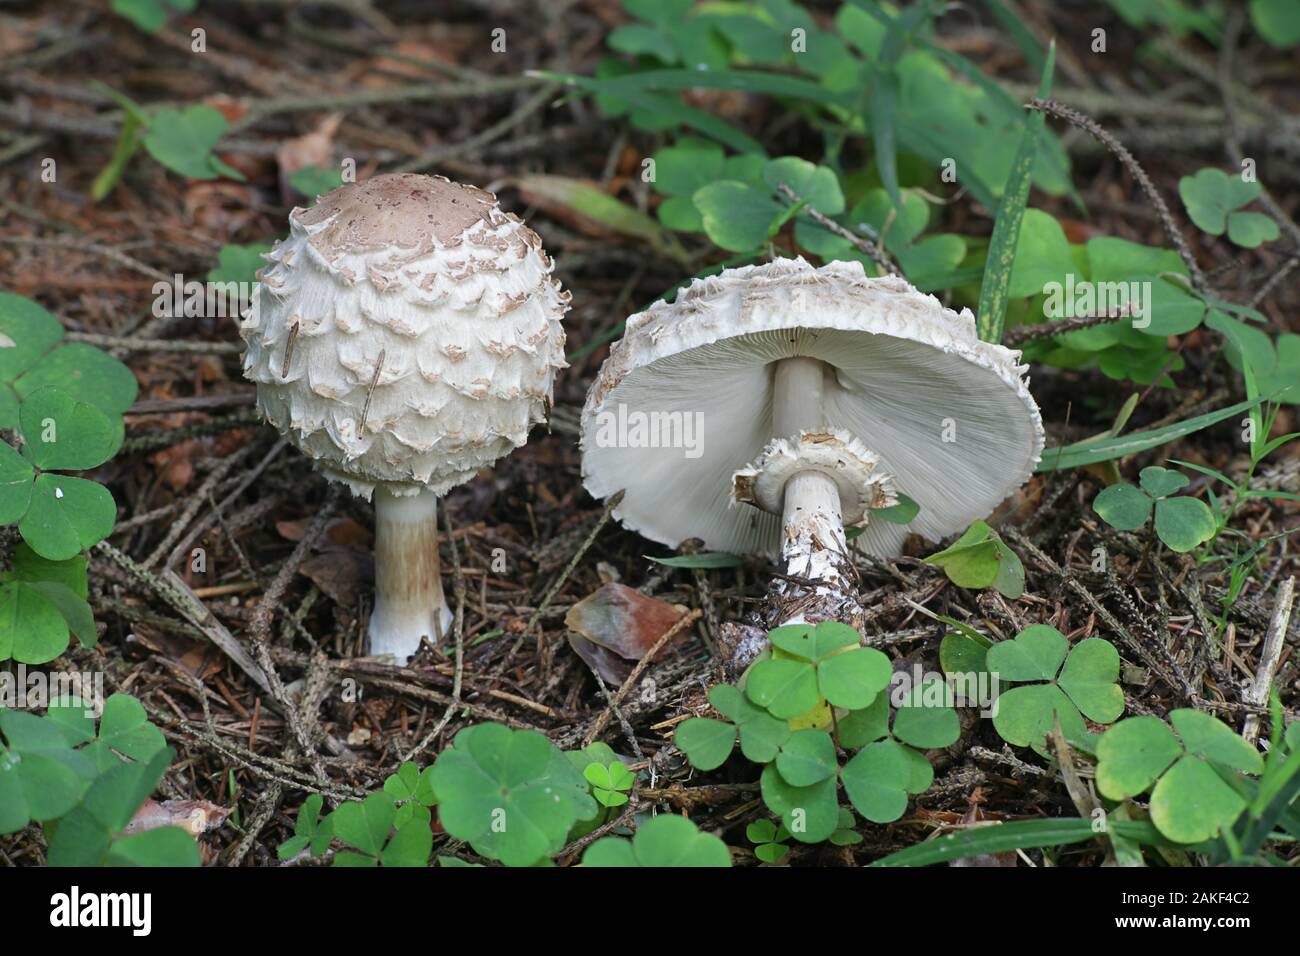 Chlorophyllum olivieri, known as Olive Shaggy Parasol, mushrooms from Finland Stock Photo